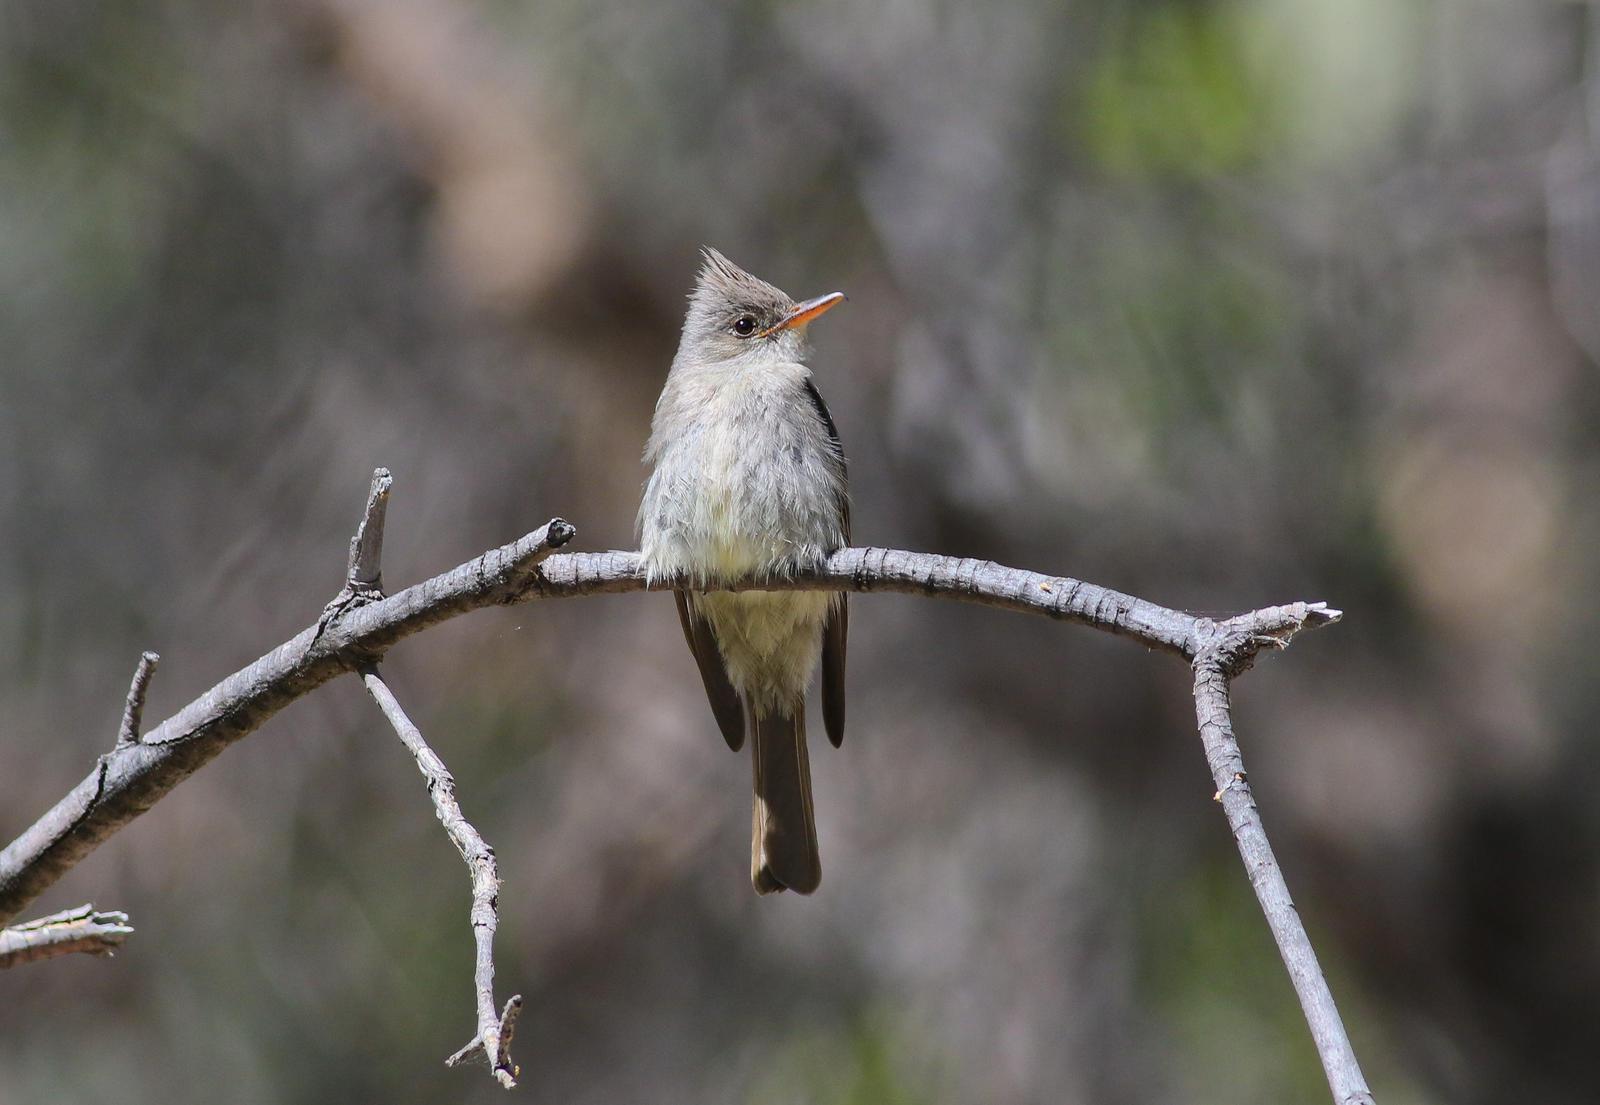 Greater Pewee Photo by Tom Ford-Hutchinson